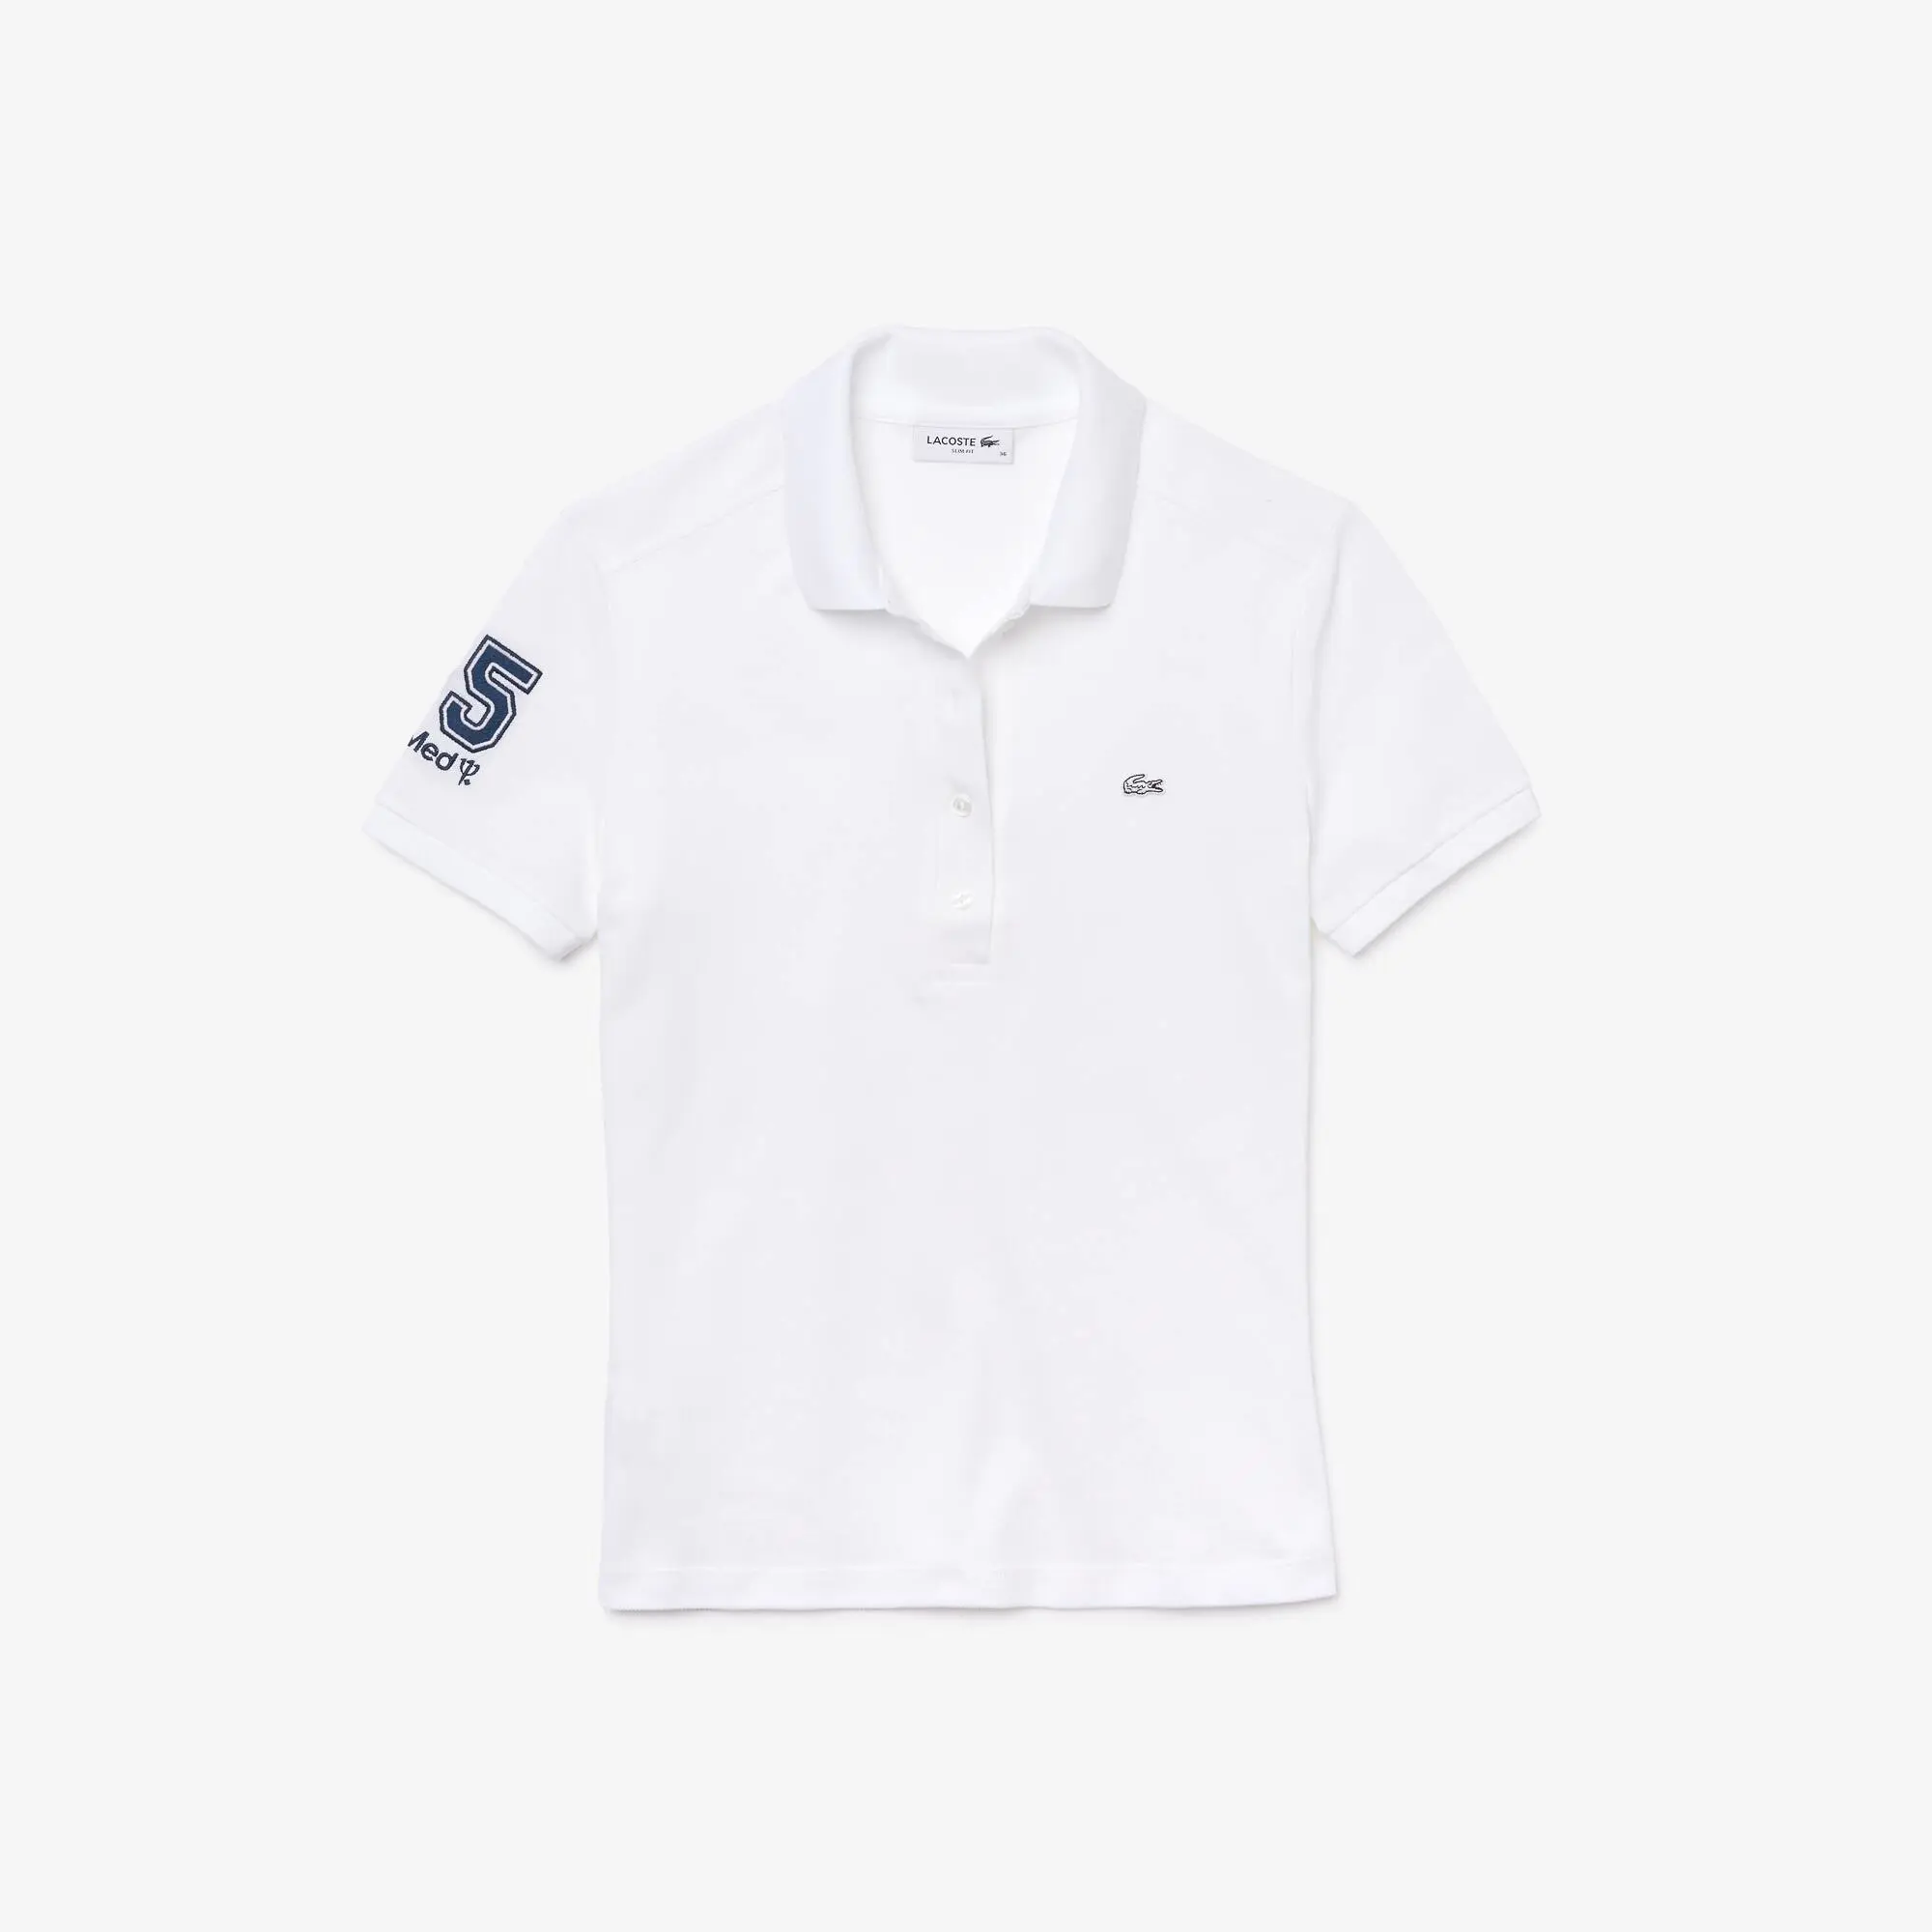 Lacoste Women’s Lacoste x Club Med Cotton Polo Shirt. 2